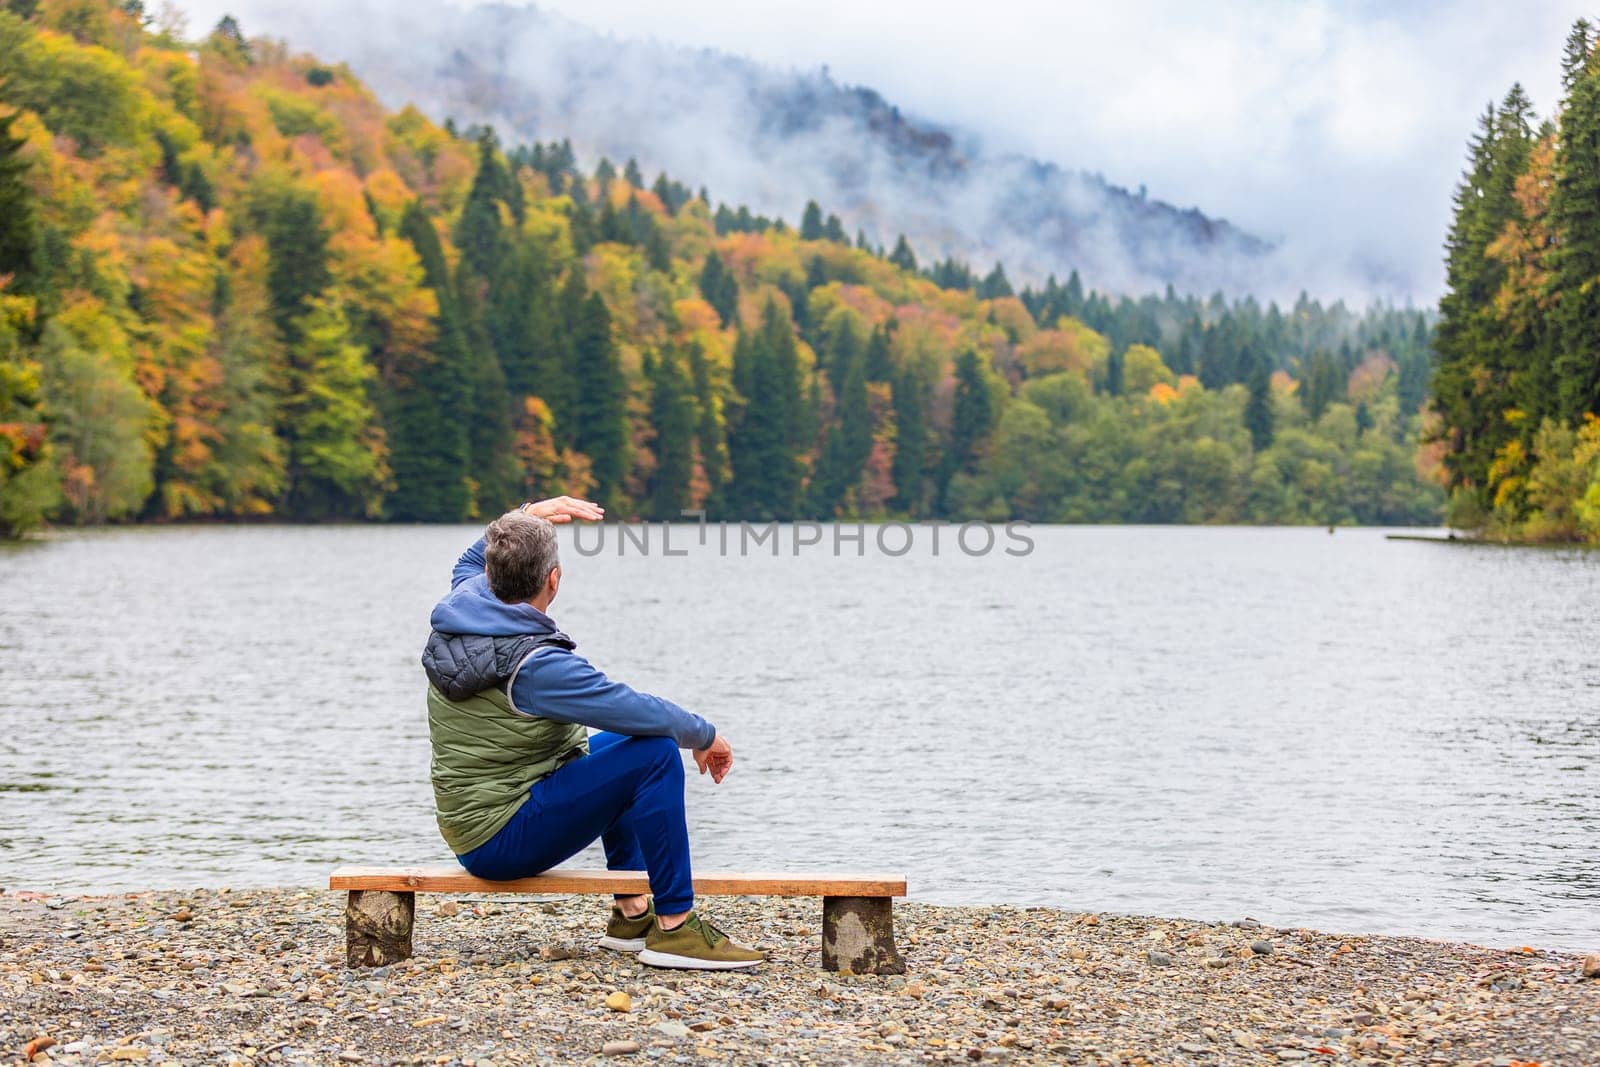 A man contemplates the beauty of nature by a lake in the mountains, plunging into the tranquility and beautiful views of the mountain landscape.